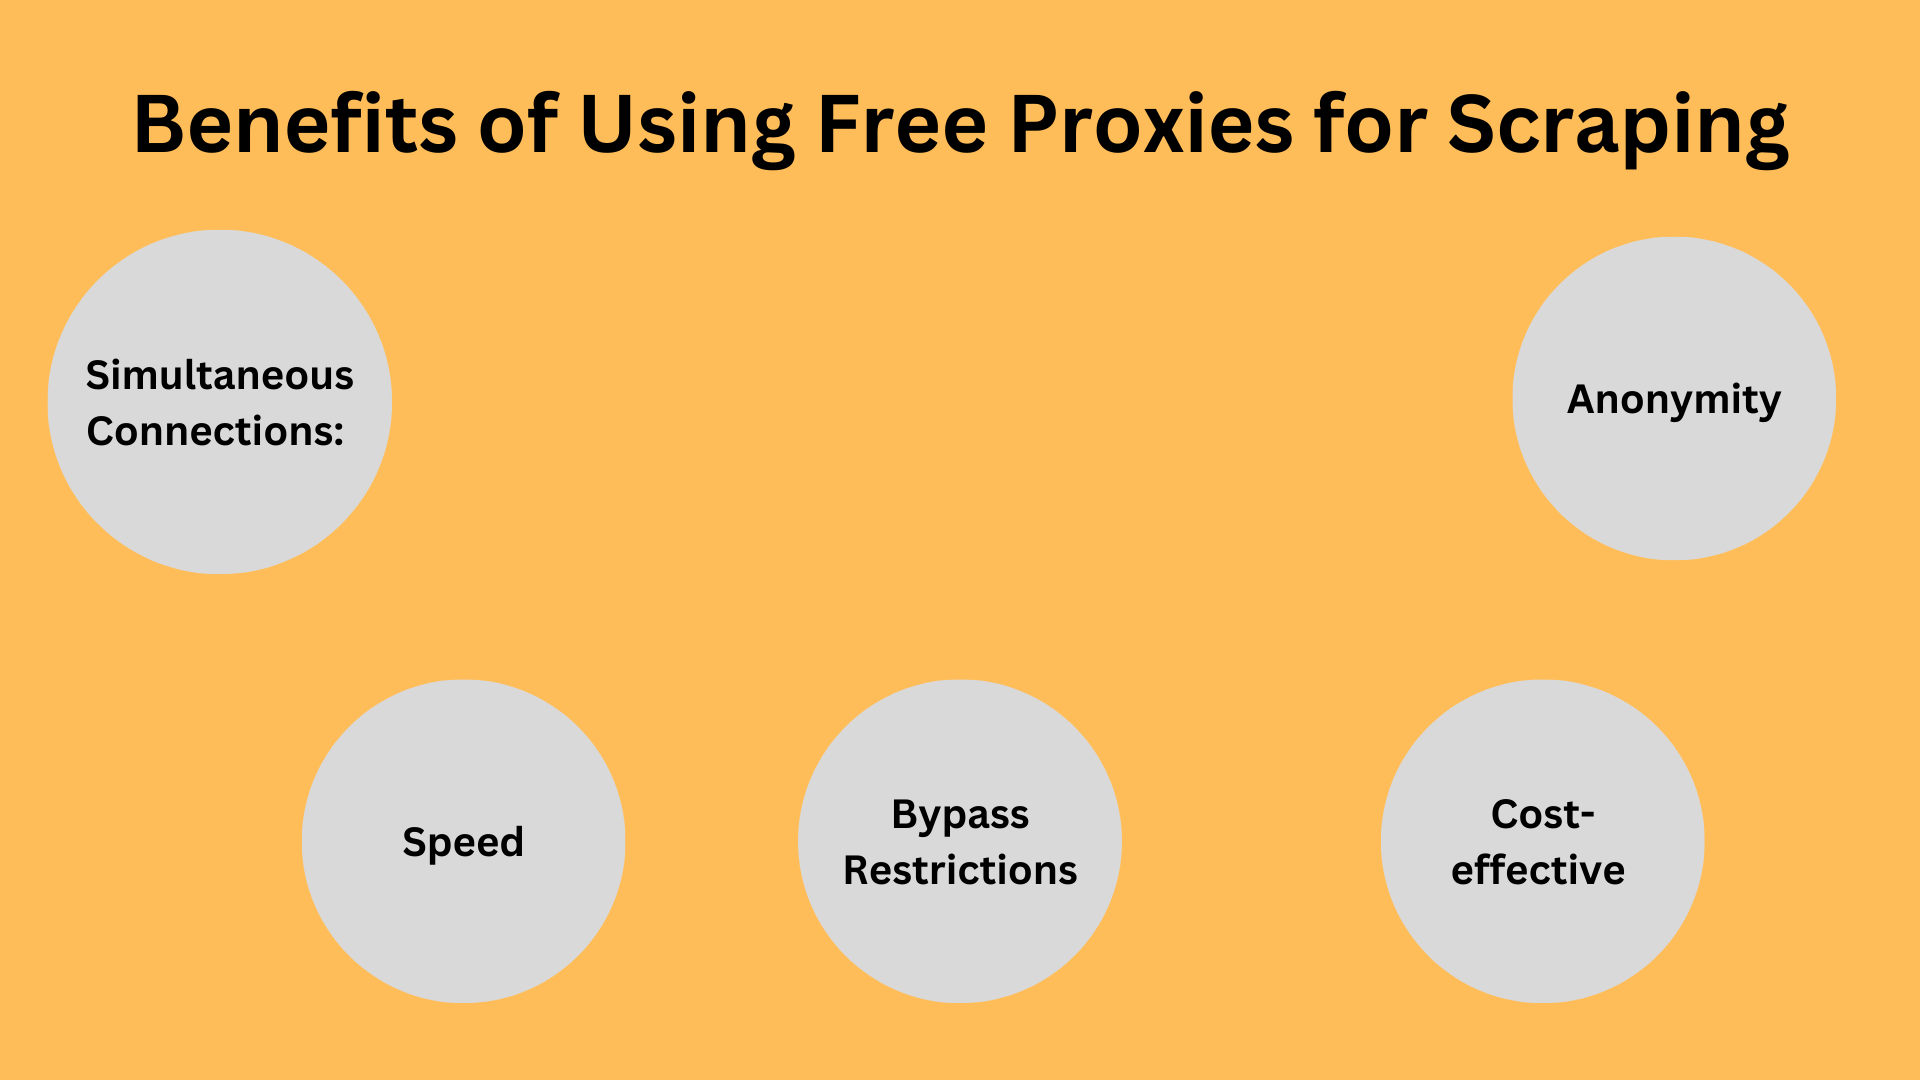 Benefits of using free proxy for scraping